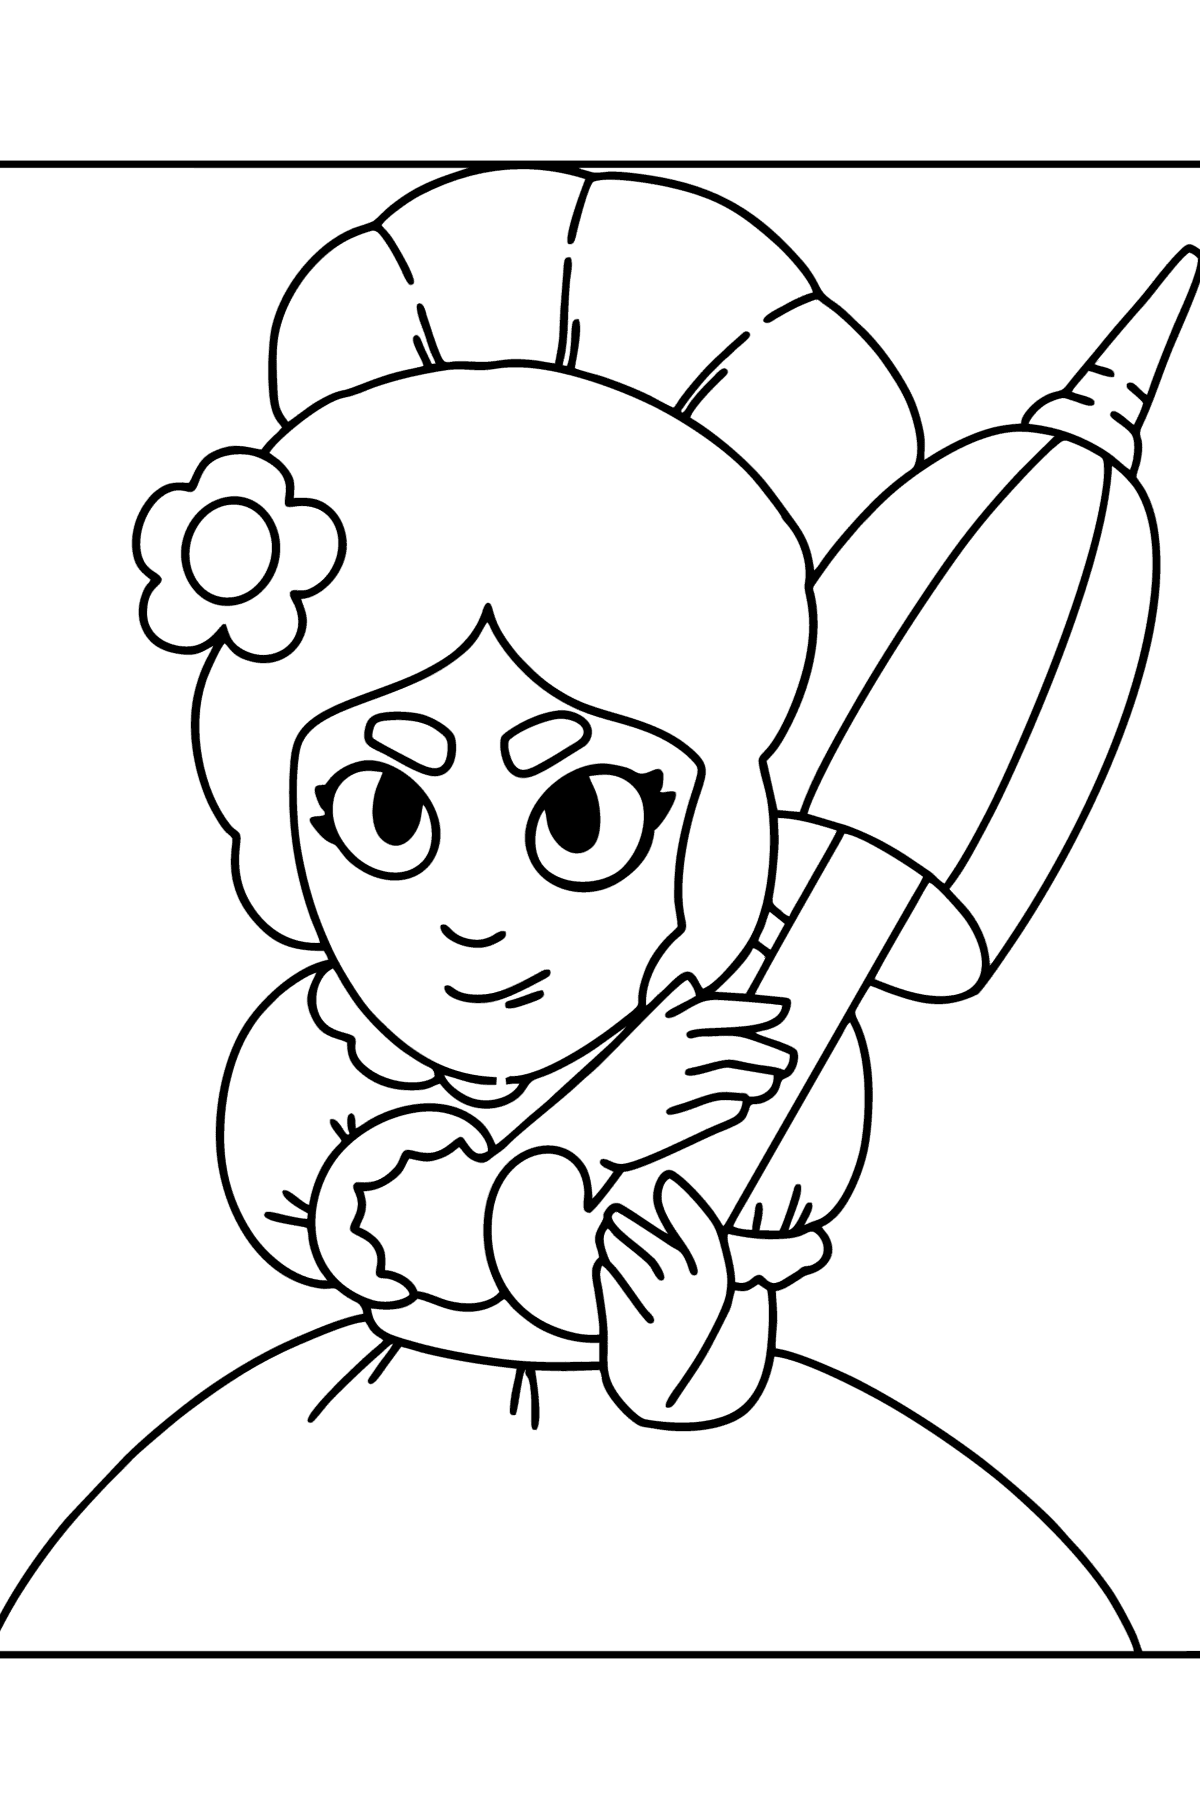 Brawl Stars Piper coloring page - Coloring Pages for Kids